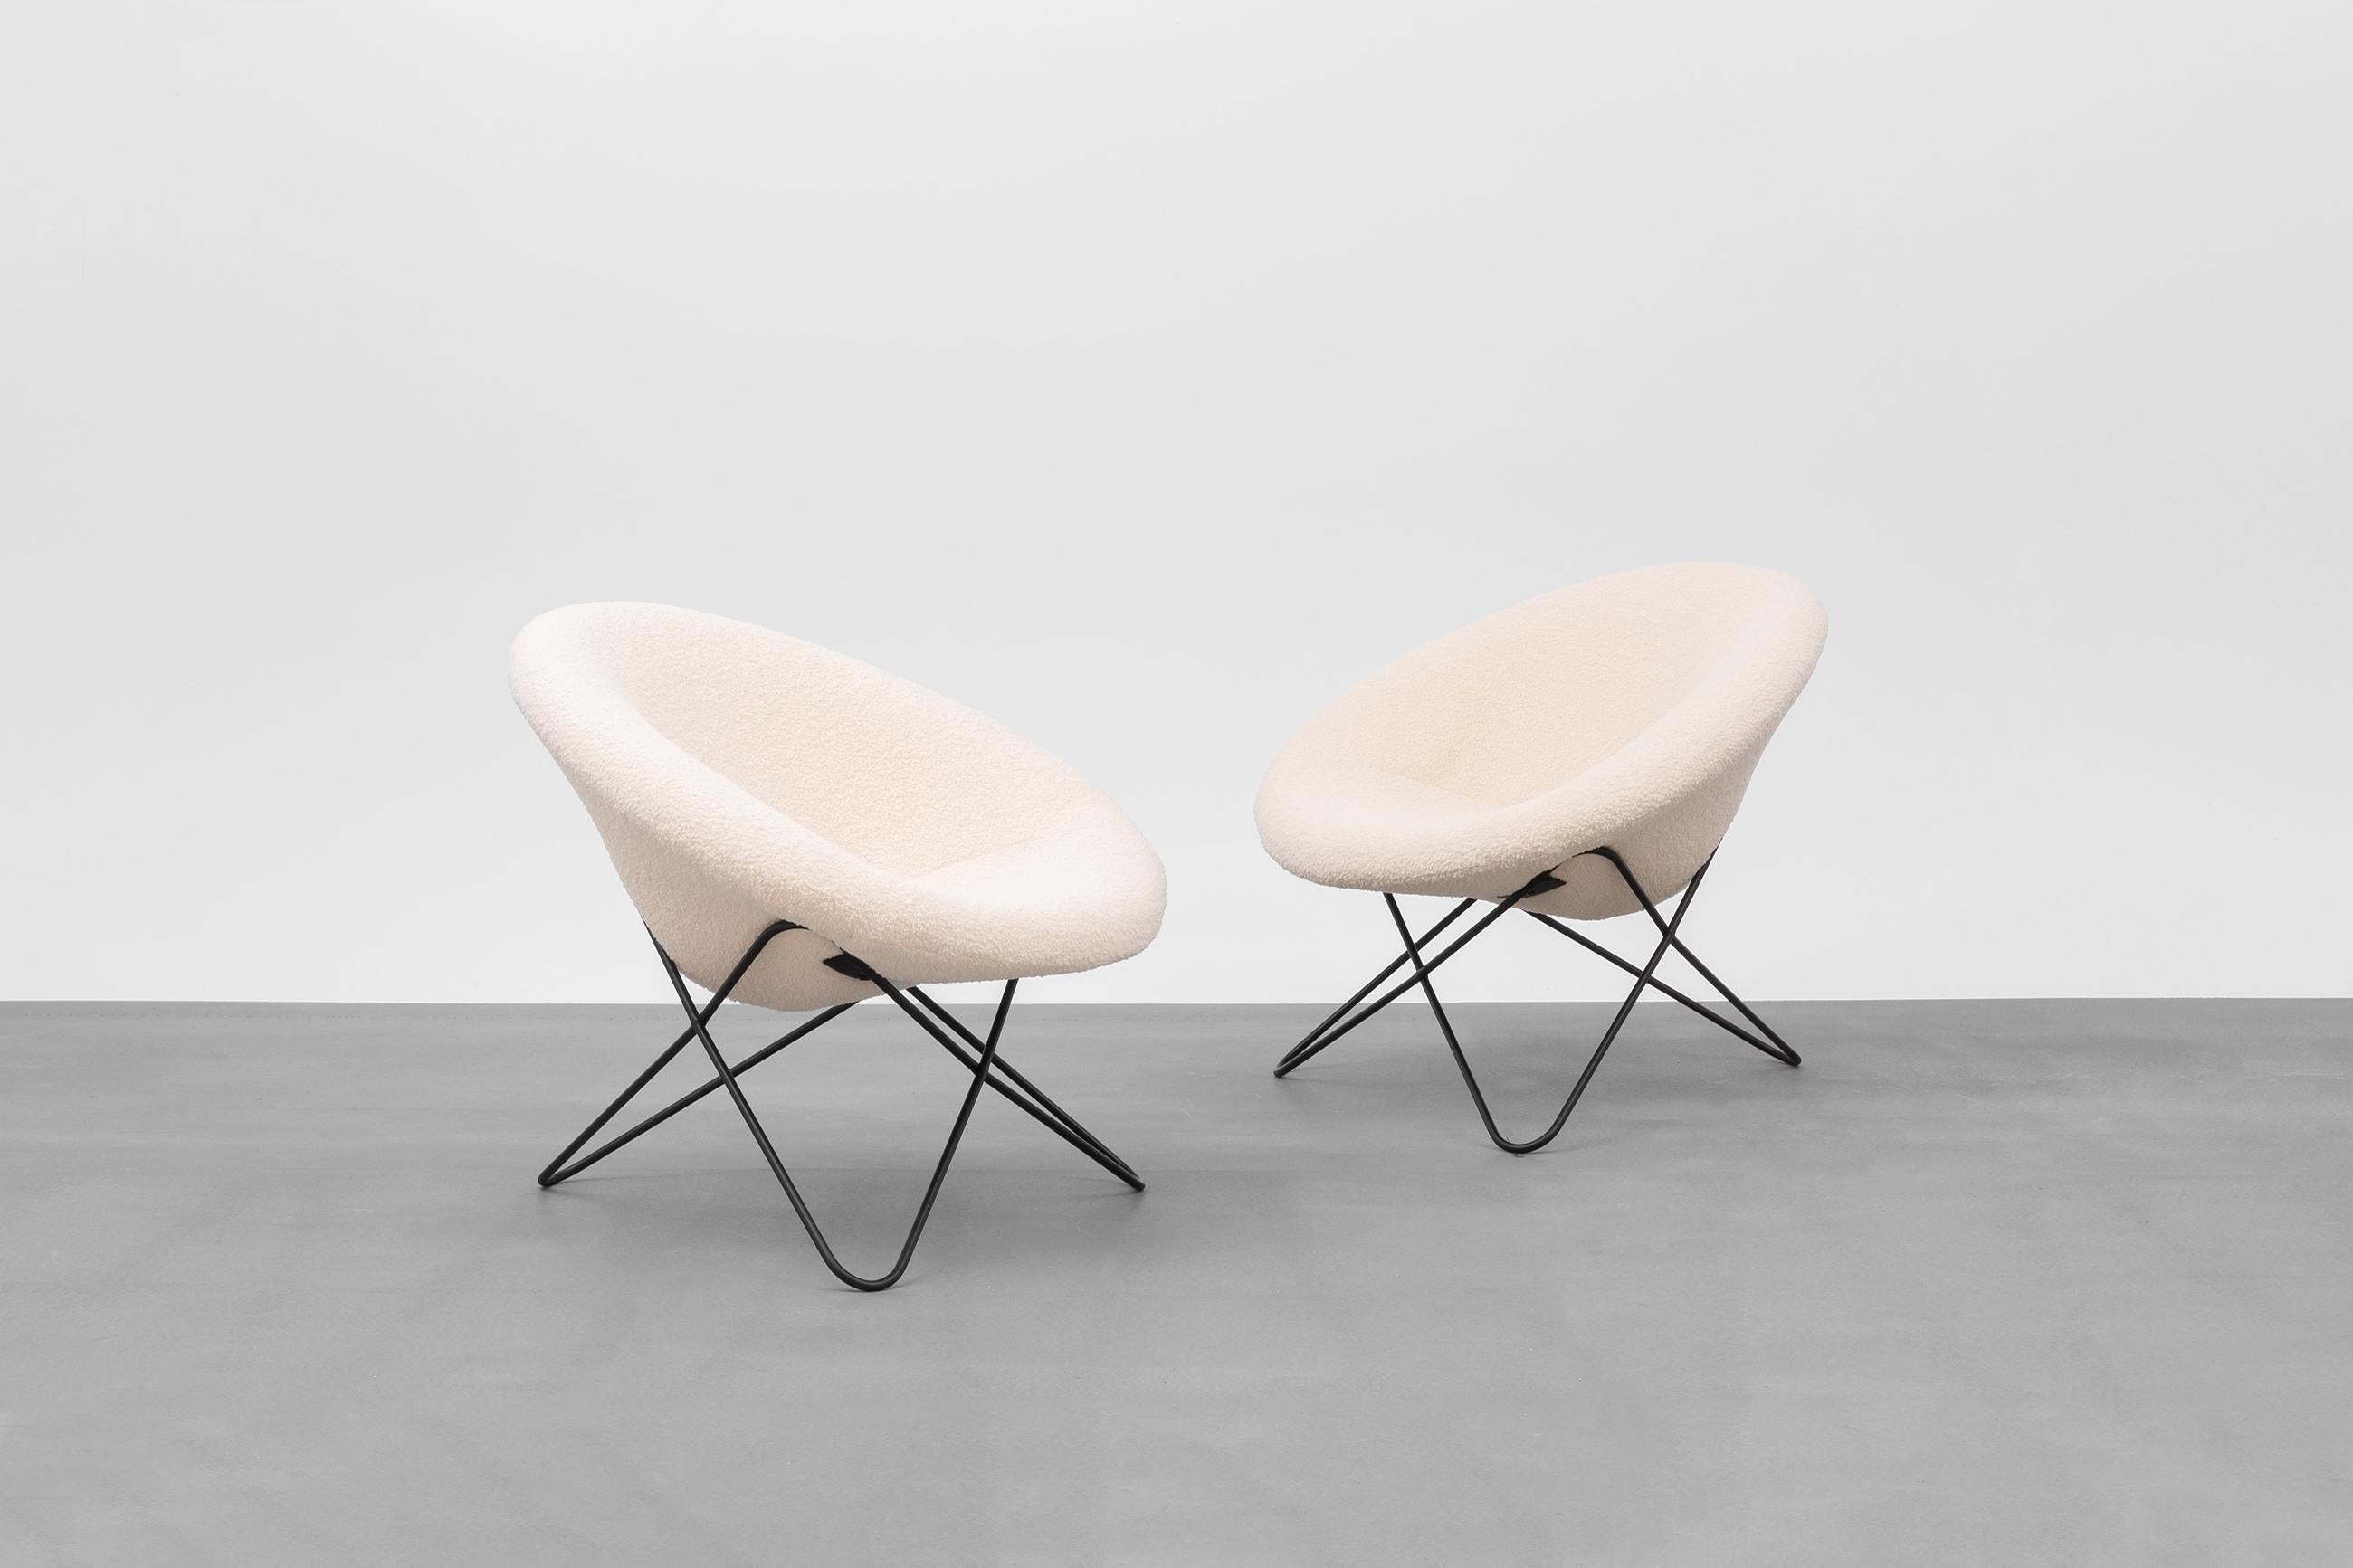 Fantastic pair of hairpin chairs, France, 1950s. Very nice bold design on black lacquered metal frame. The chairs are reupholstered in a nice warm off-white bouclé fabric, the foam inside is also renewed. Very comfortable.
Published in the book